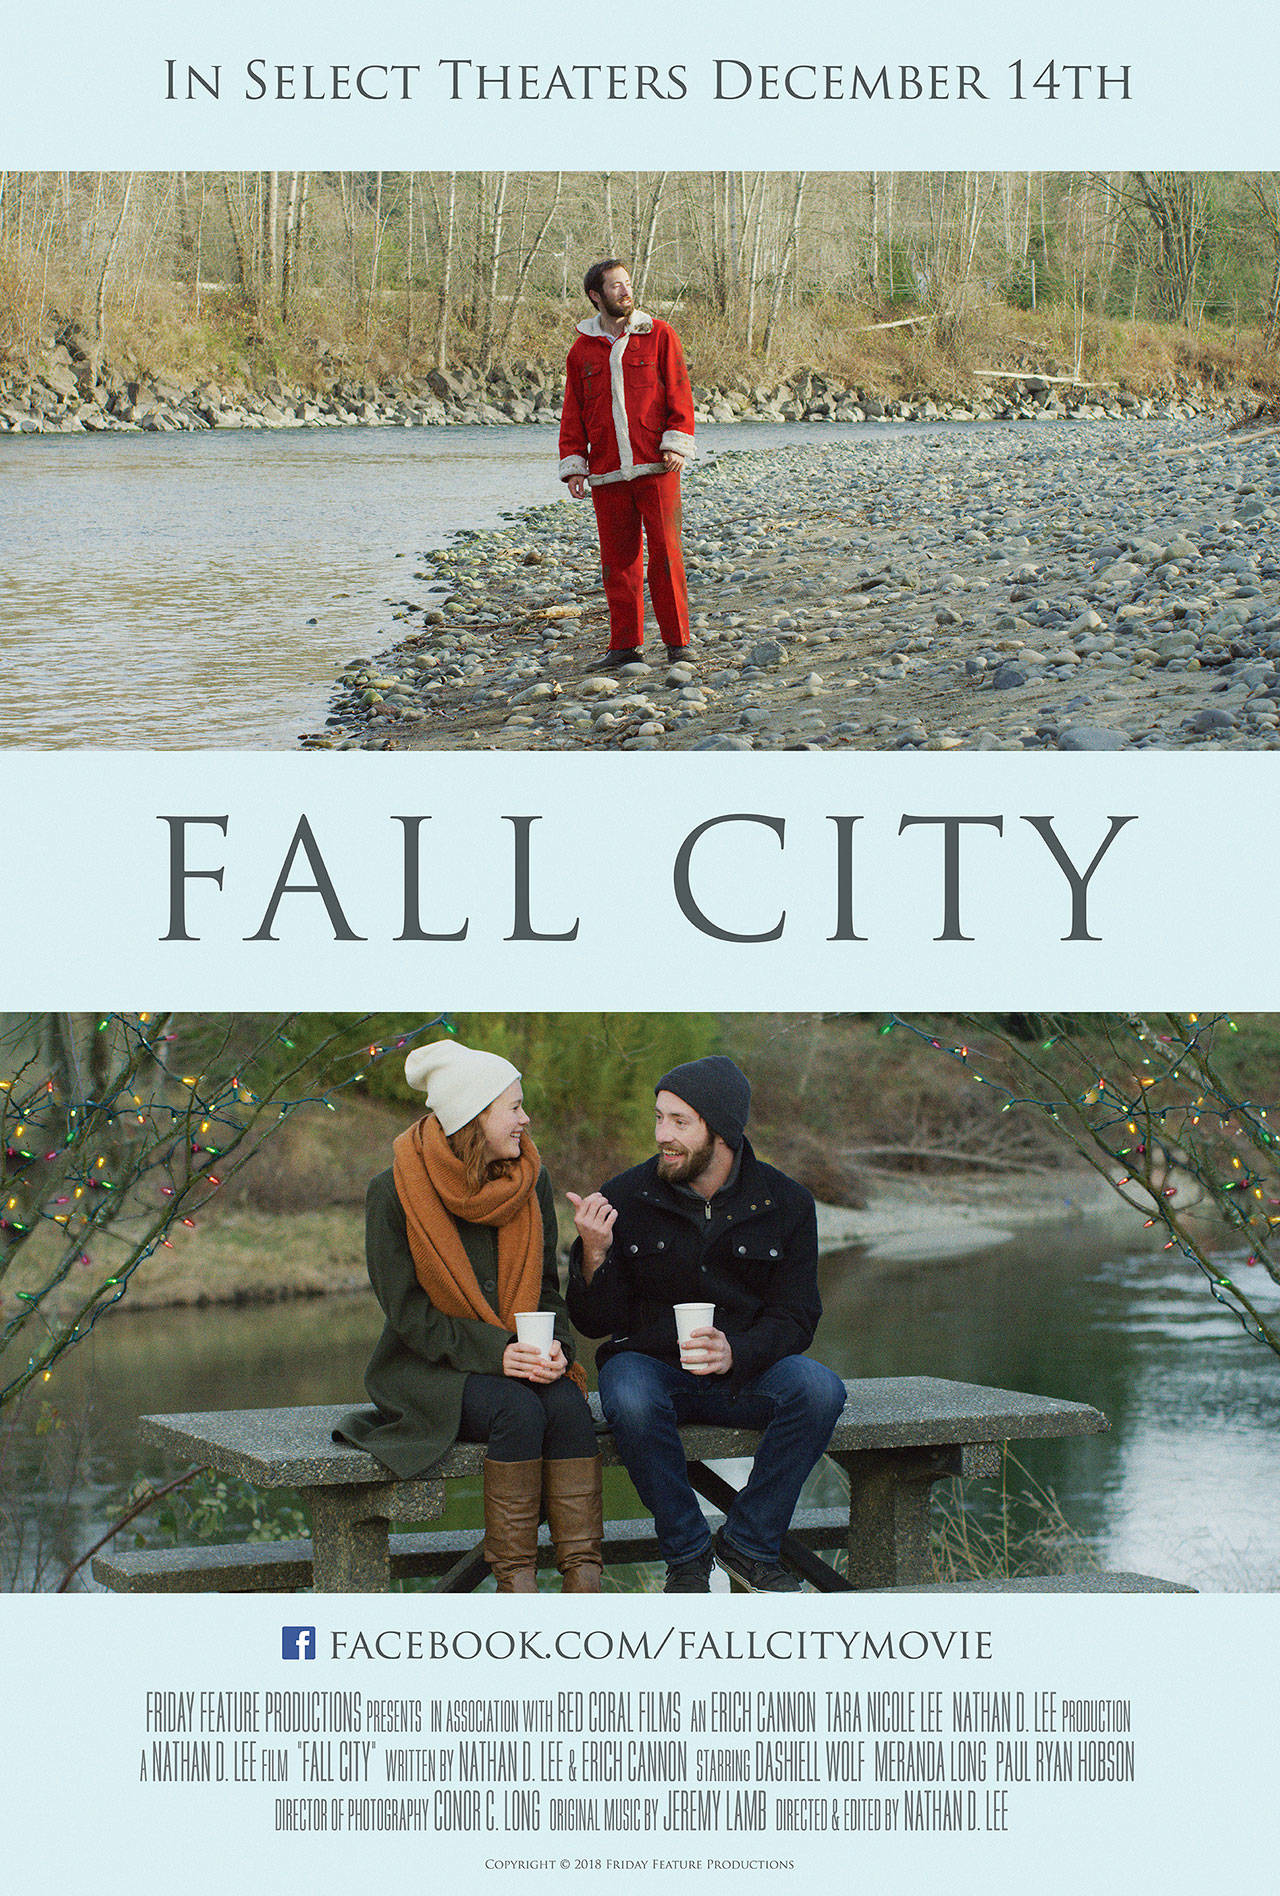 Image courtesy of Erich Cannon | Erich Cannon, former manager of Bainbridge Cinemas, co-wrote and produced the film “Fall City,” recently released to video-on-demand via Amazon and due for a special three-day theatrical run at the Lynwood Theatre at 5 p.m. Friday, Dec. 14 through Sunday, Dec. 16.